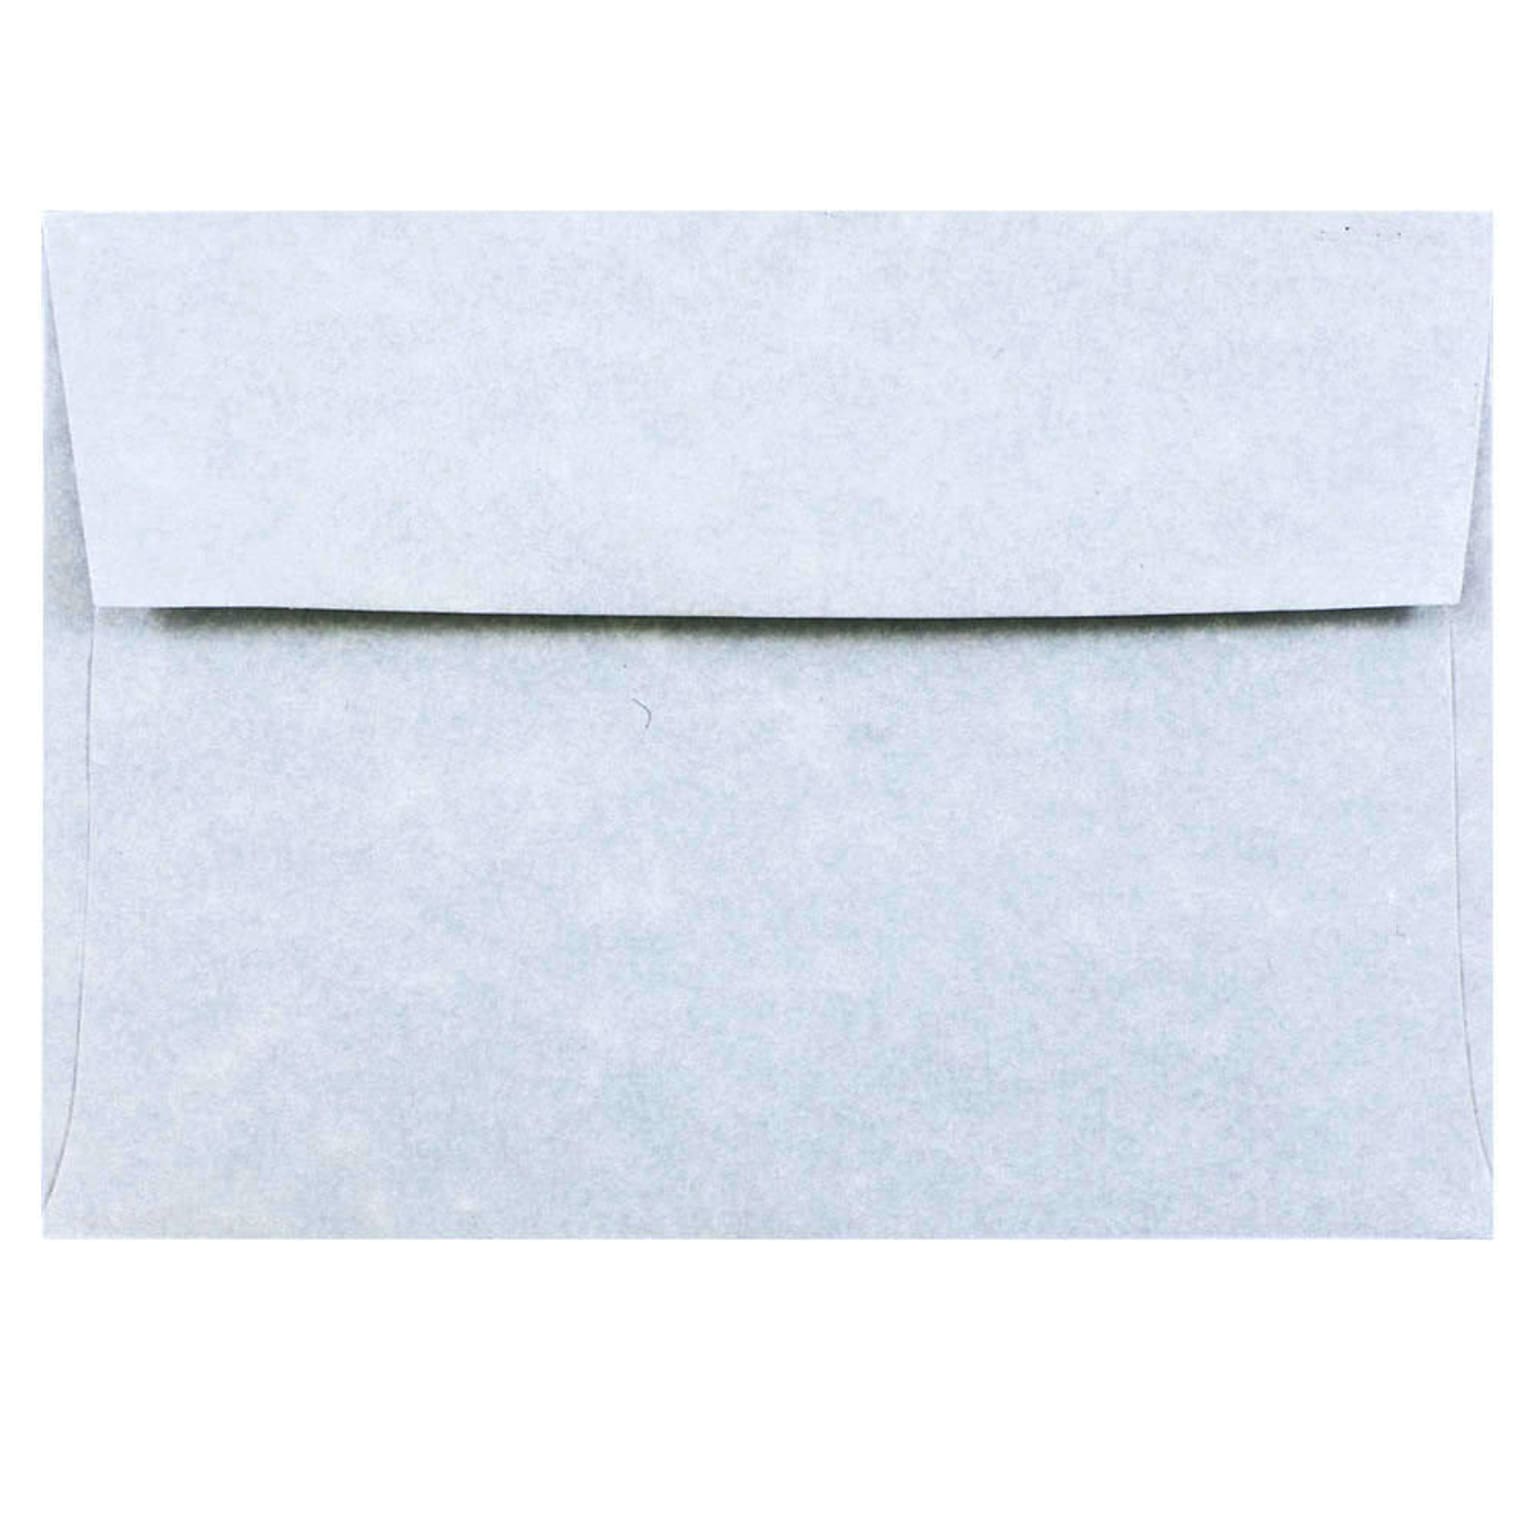 JAM Paper 4Bar A1 Parchment Invitation Envelopes, 3.625 x 5.125, Blue Recycled, 25/Pack (900877844)